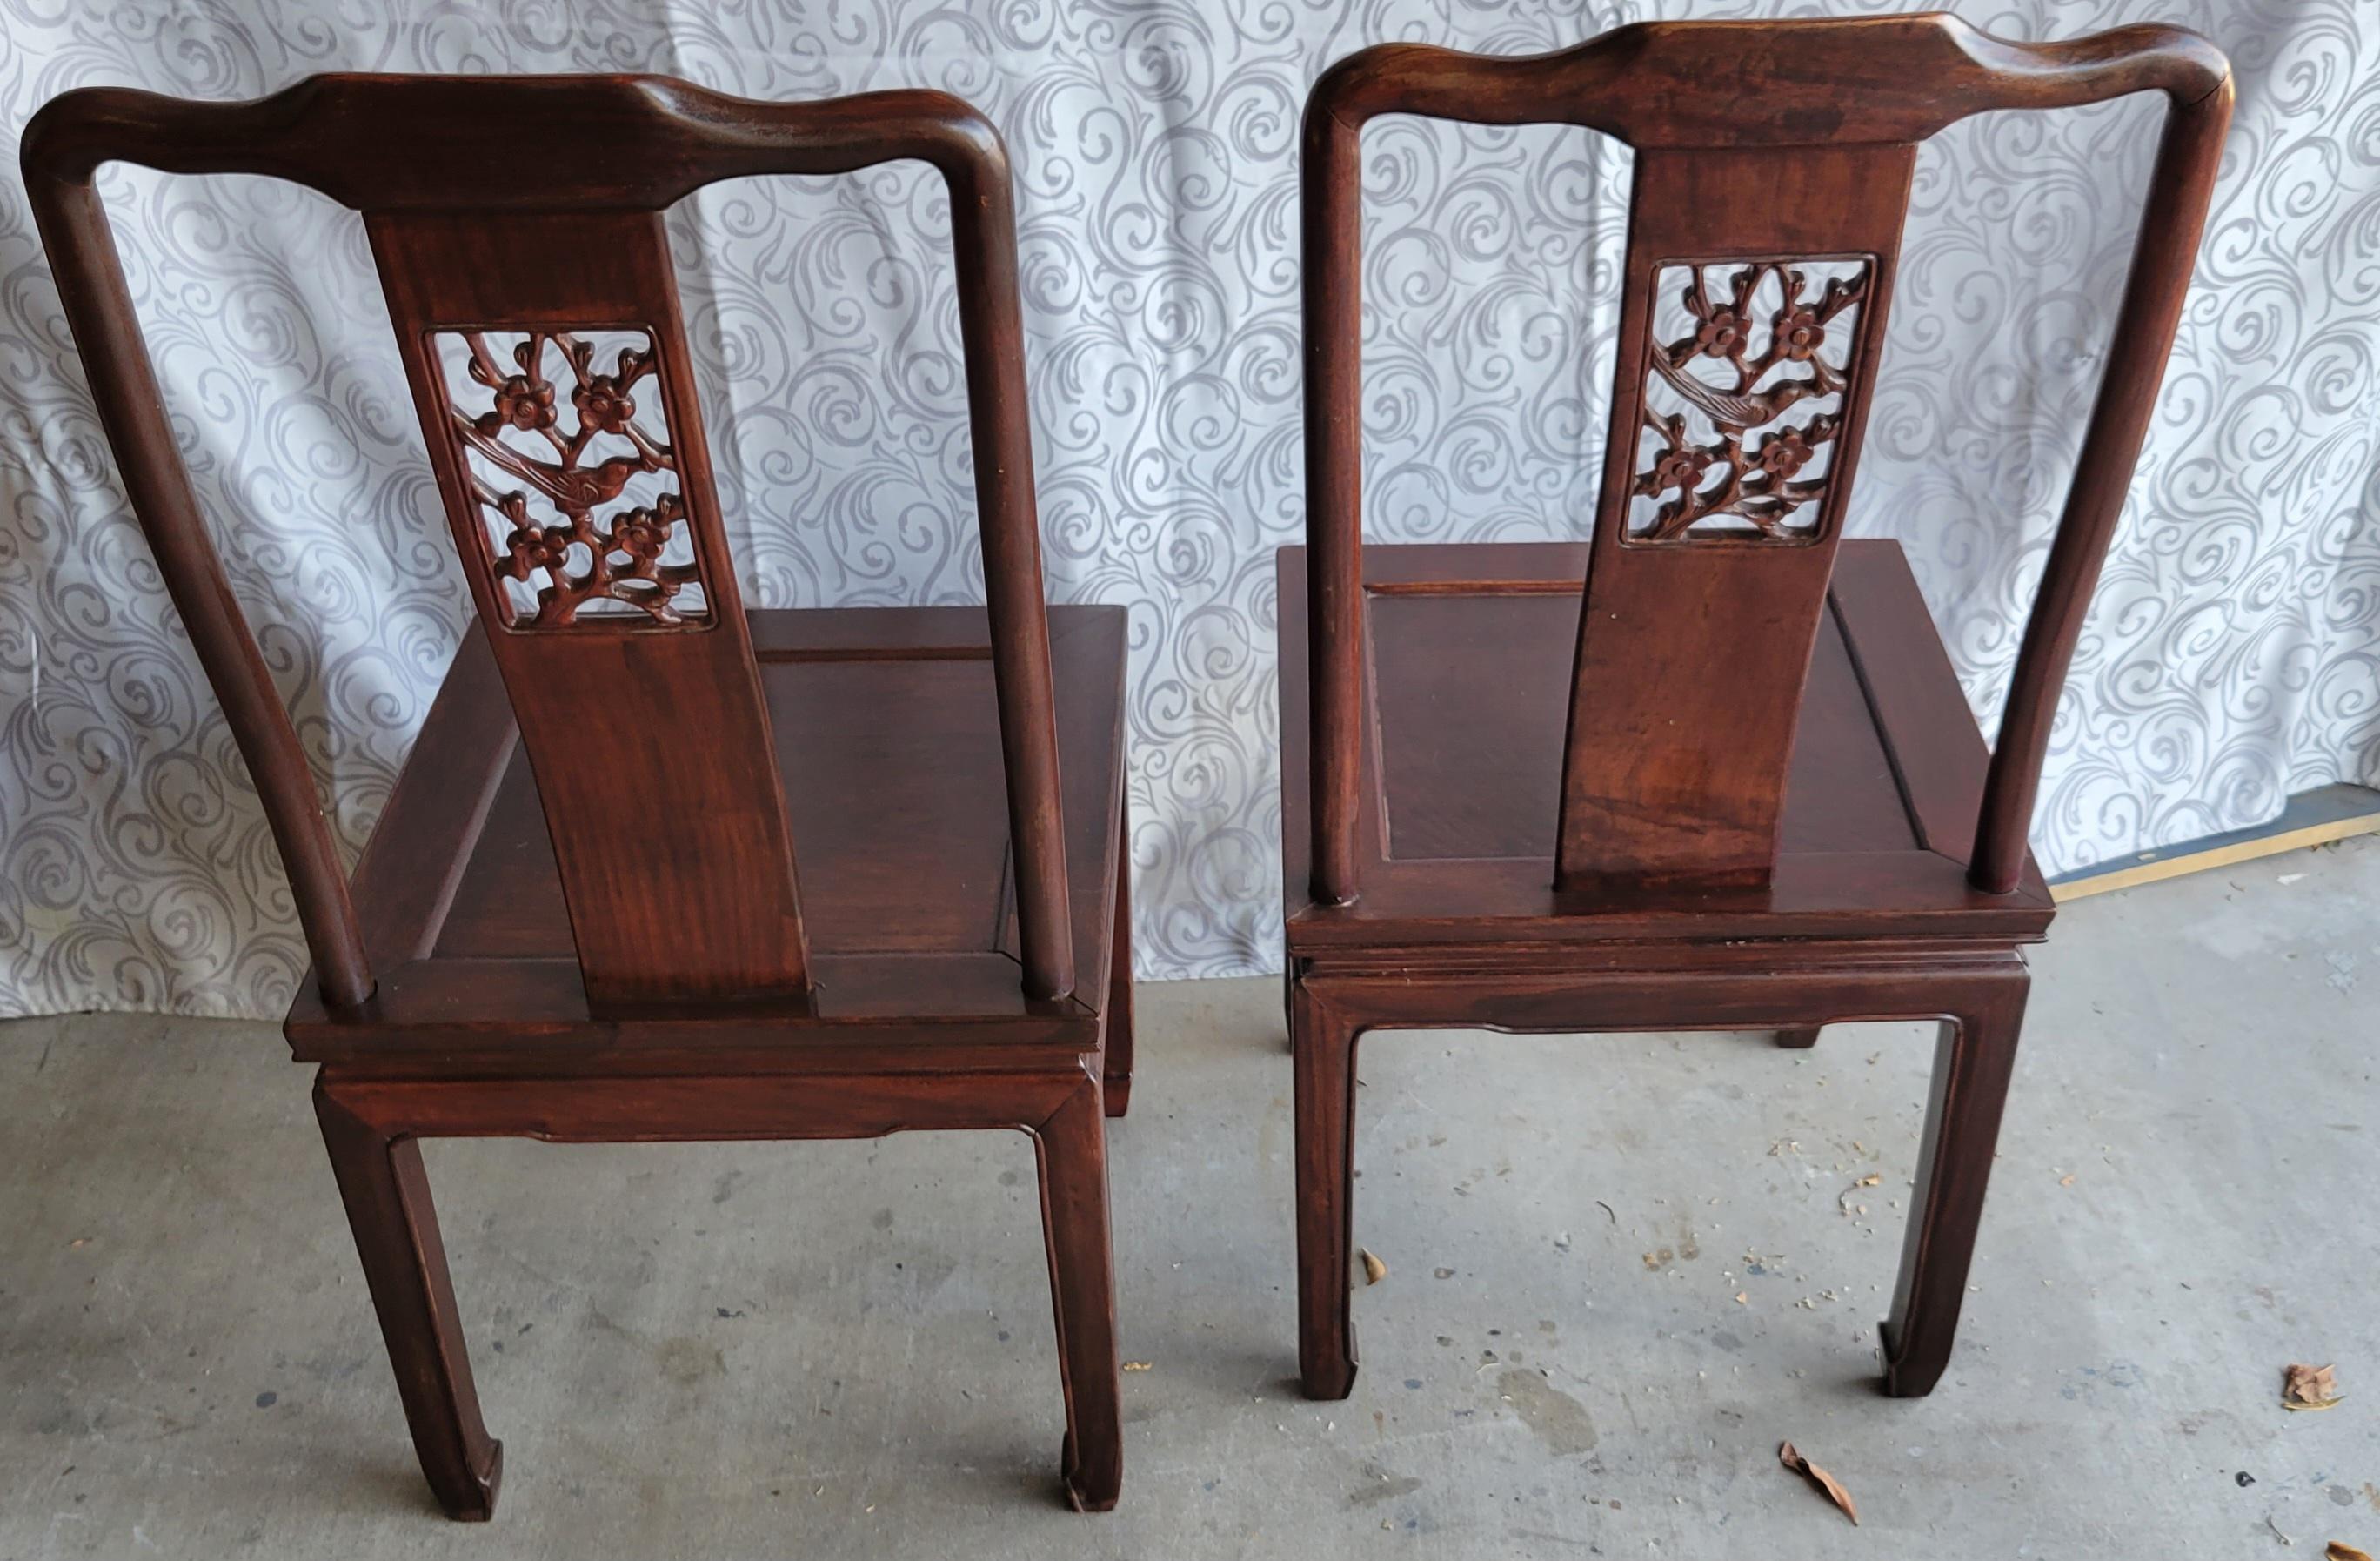 Vintage George Zee and Co. Mahogany Side Chairs - set of 2 For Sale 2